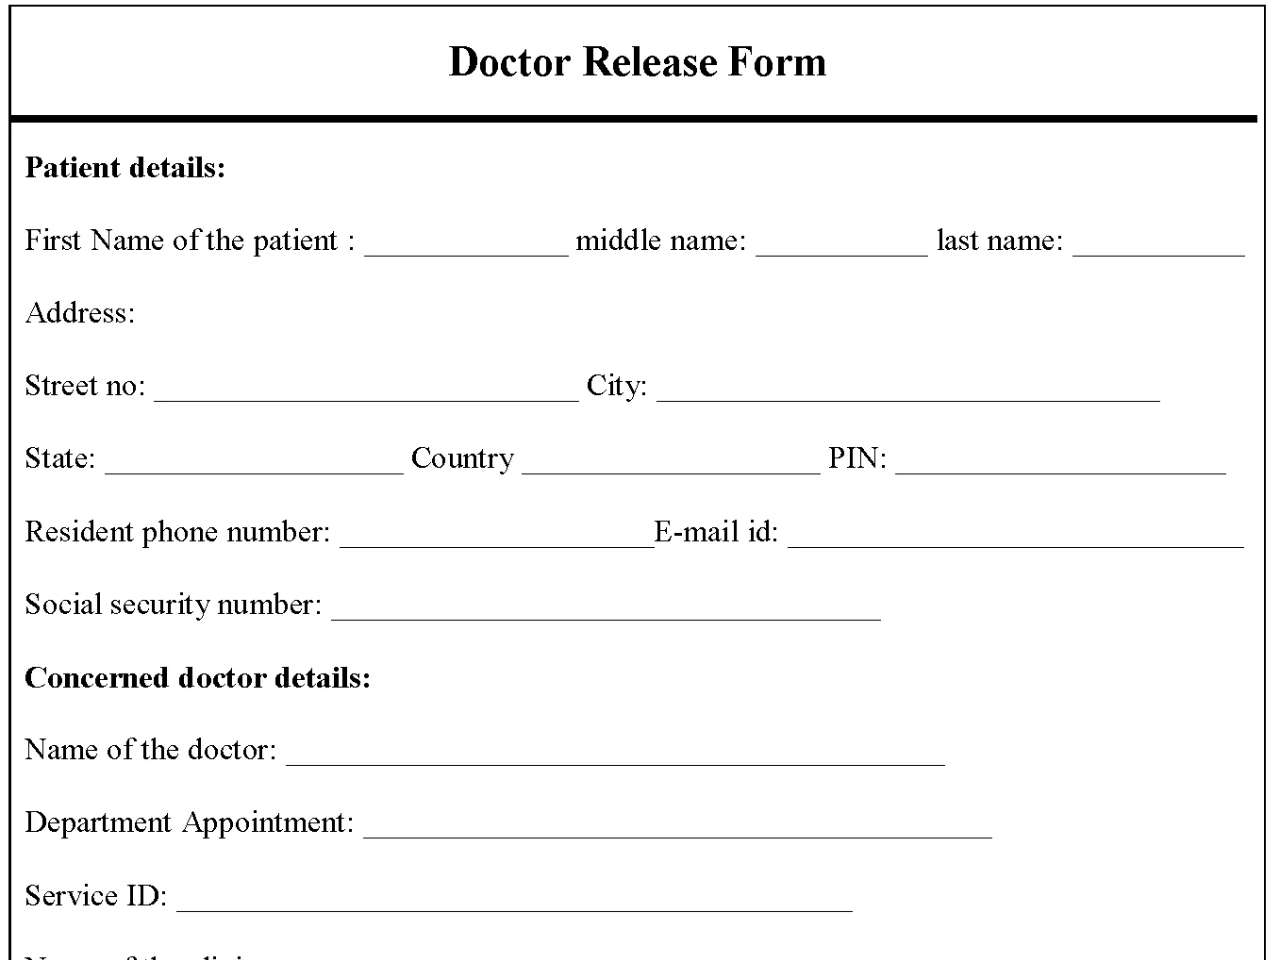 Doctor Release Fillable PDF Template